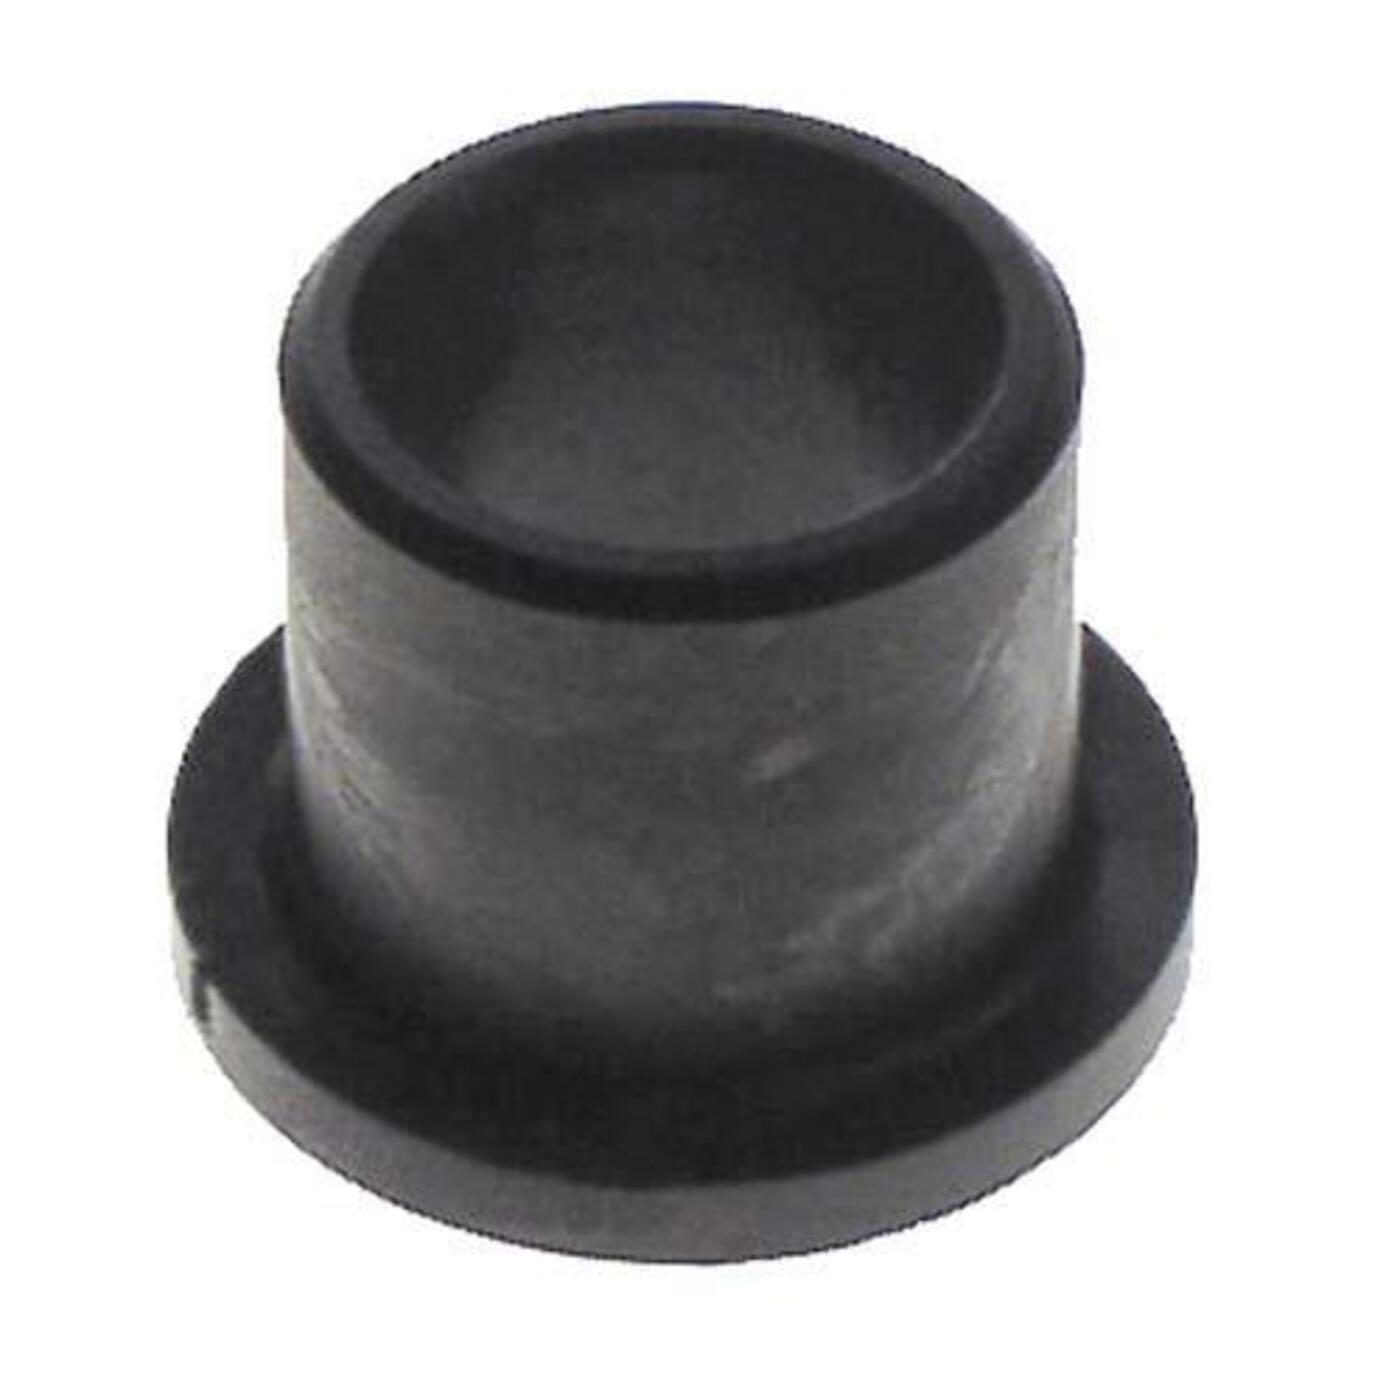 E-Z-GO RXV A-arm Bushing (Years 2008-Up)